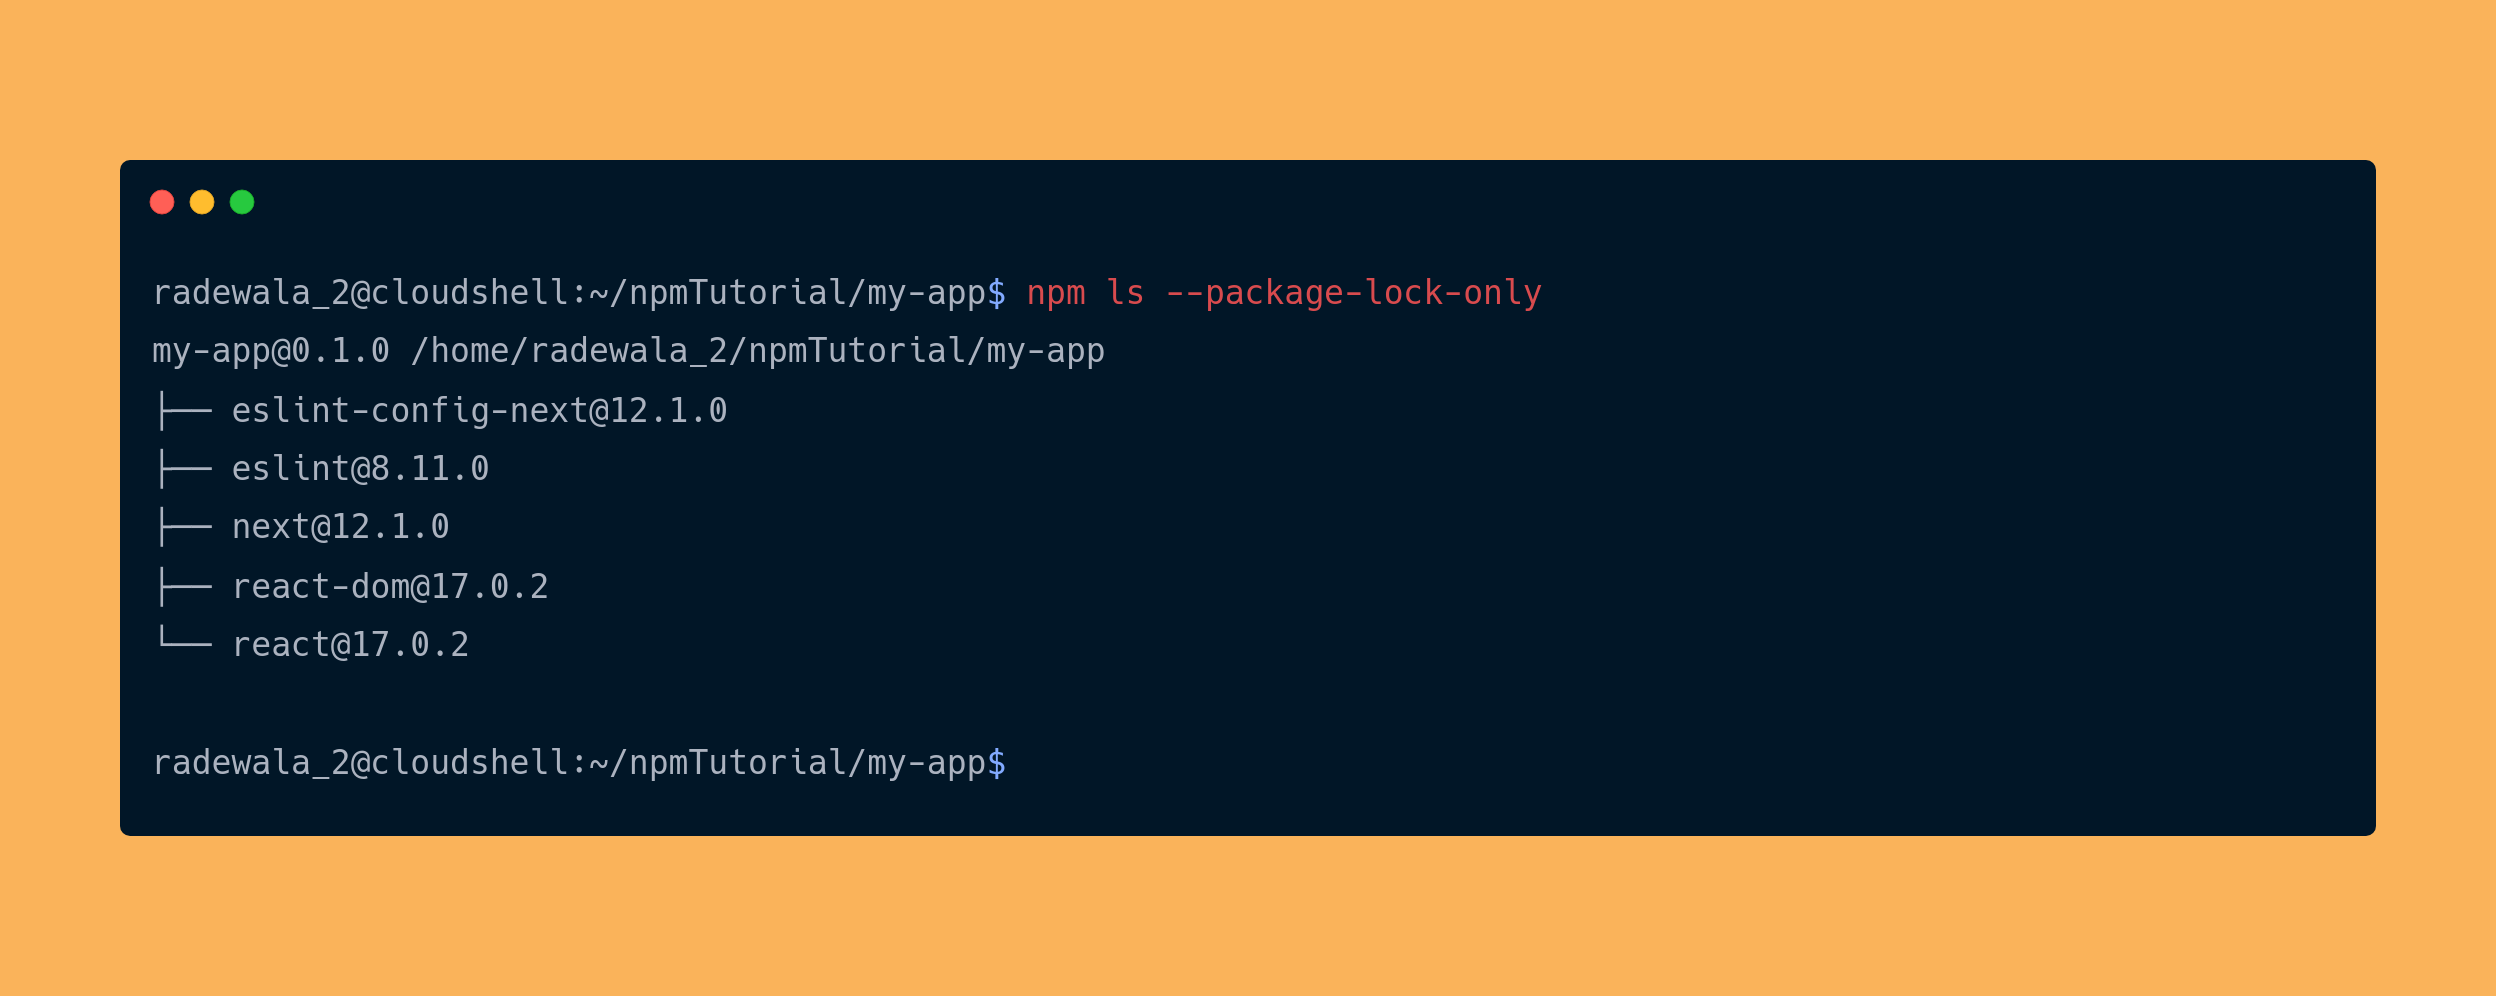 output the npm ls --package-lock-only